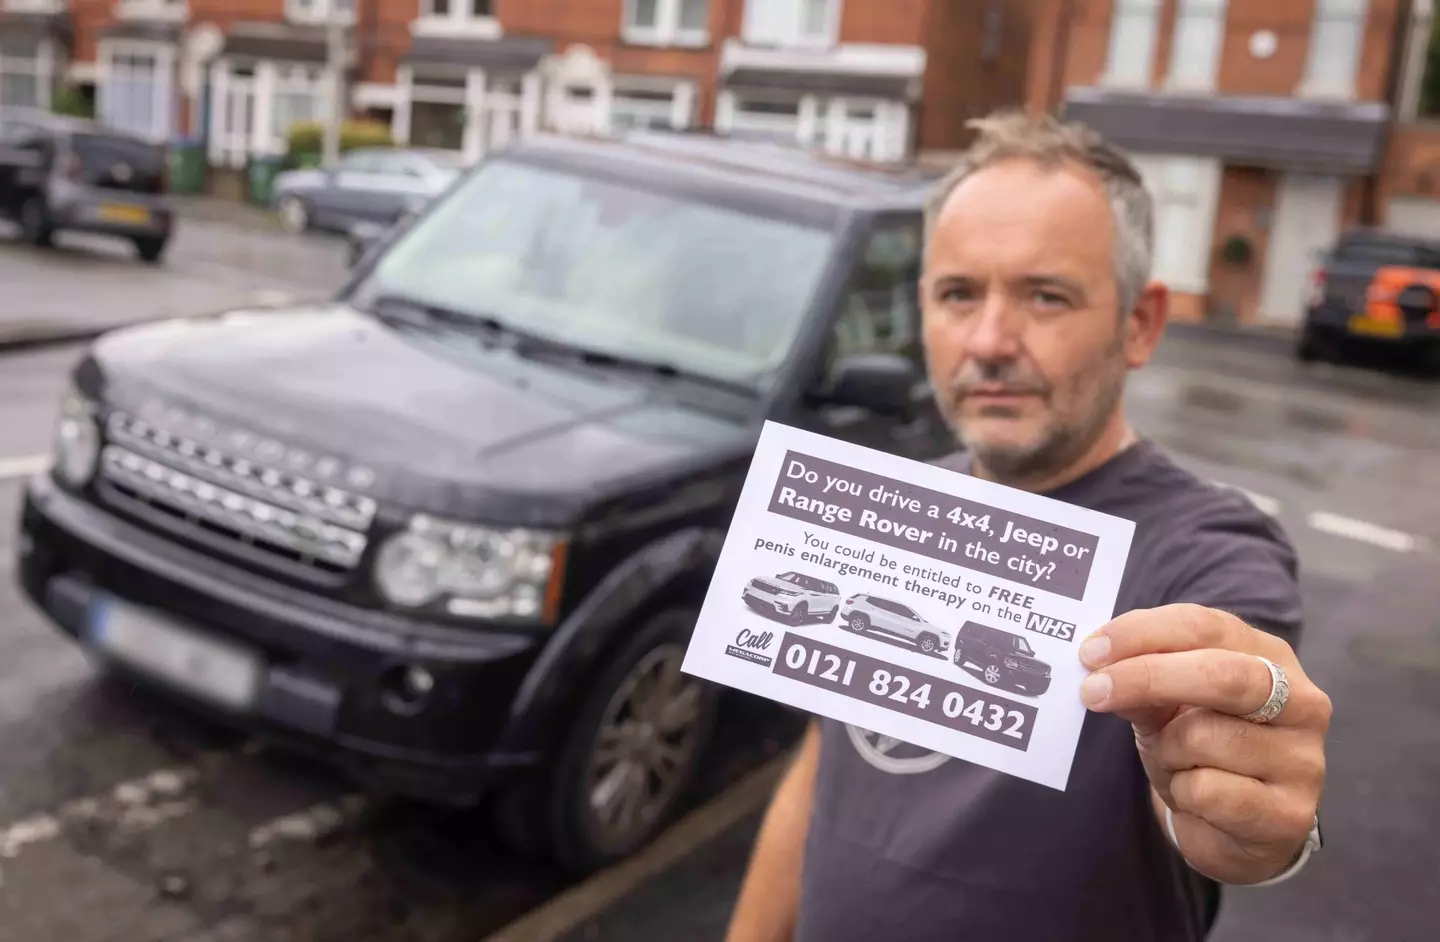 Man receives two notes on Land Rover while parked in Birmingham.